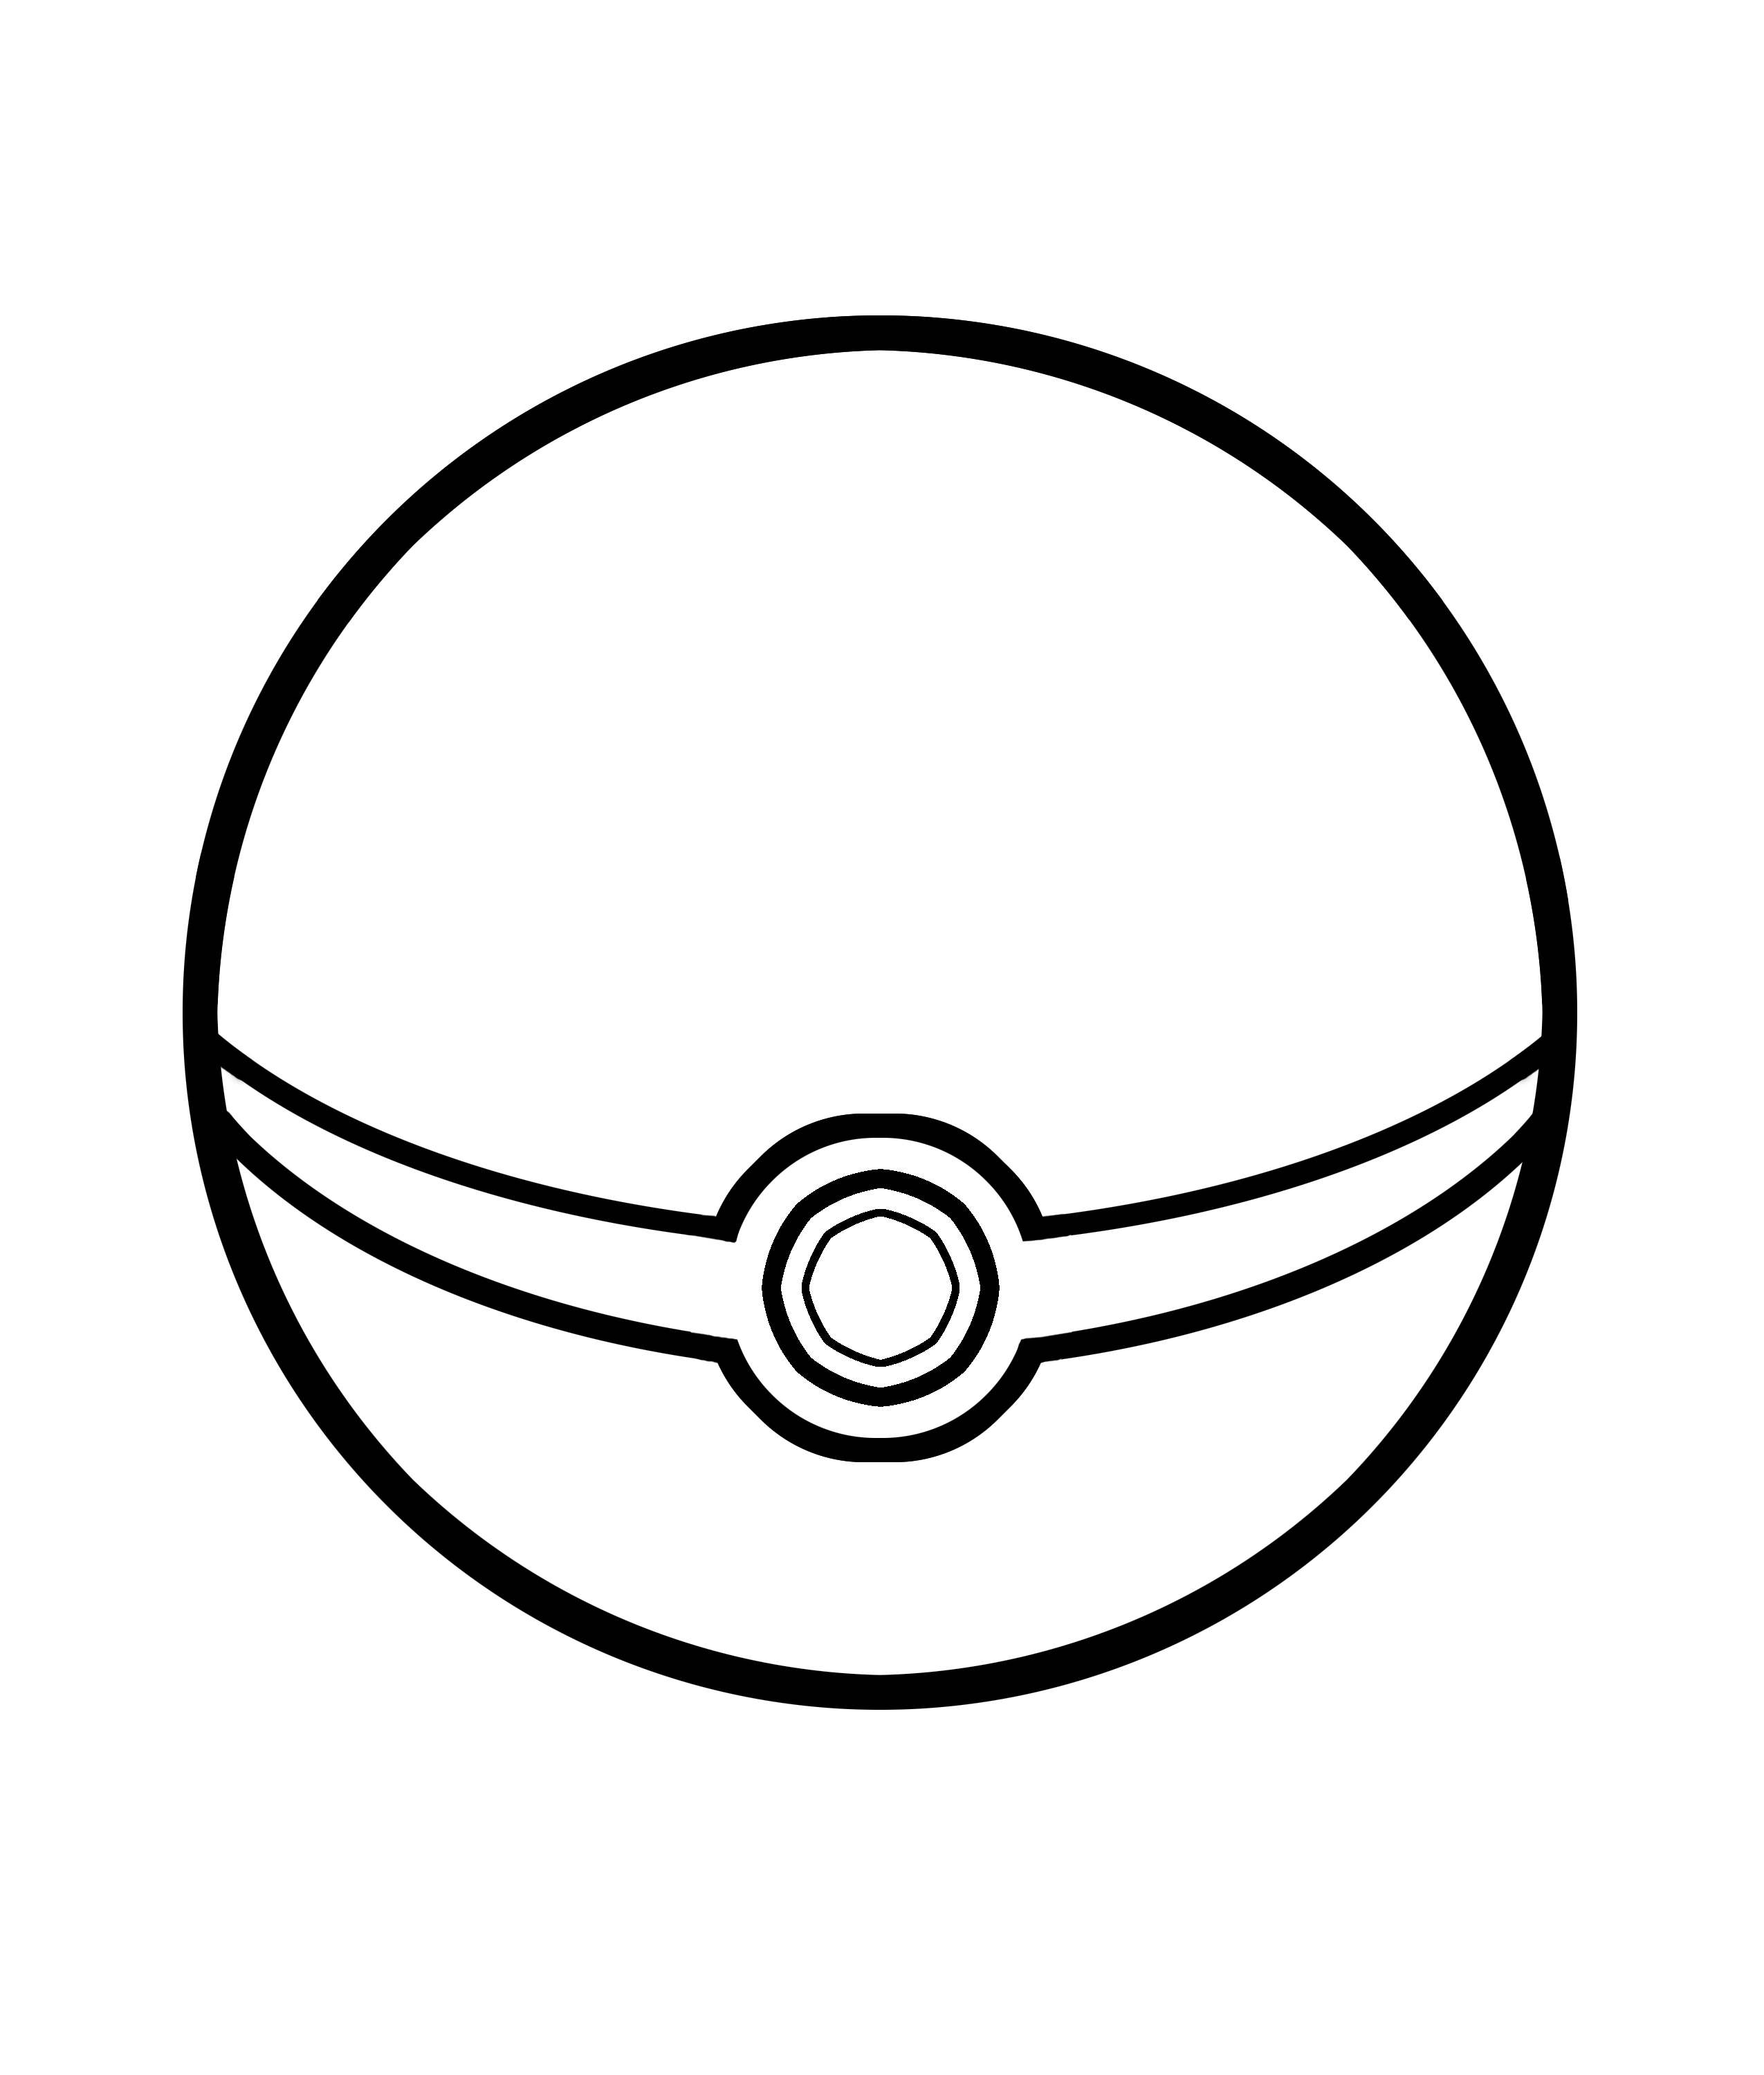 pokemon-ball-coloring-pages-within-pokeballs-colouring-pages-clipart-best-clipart-best